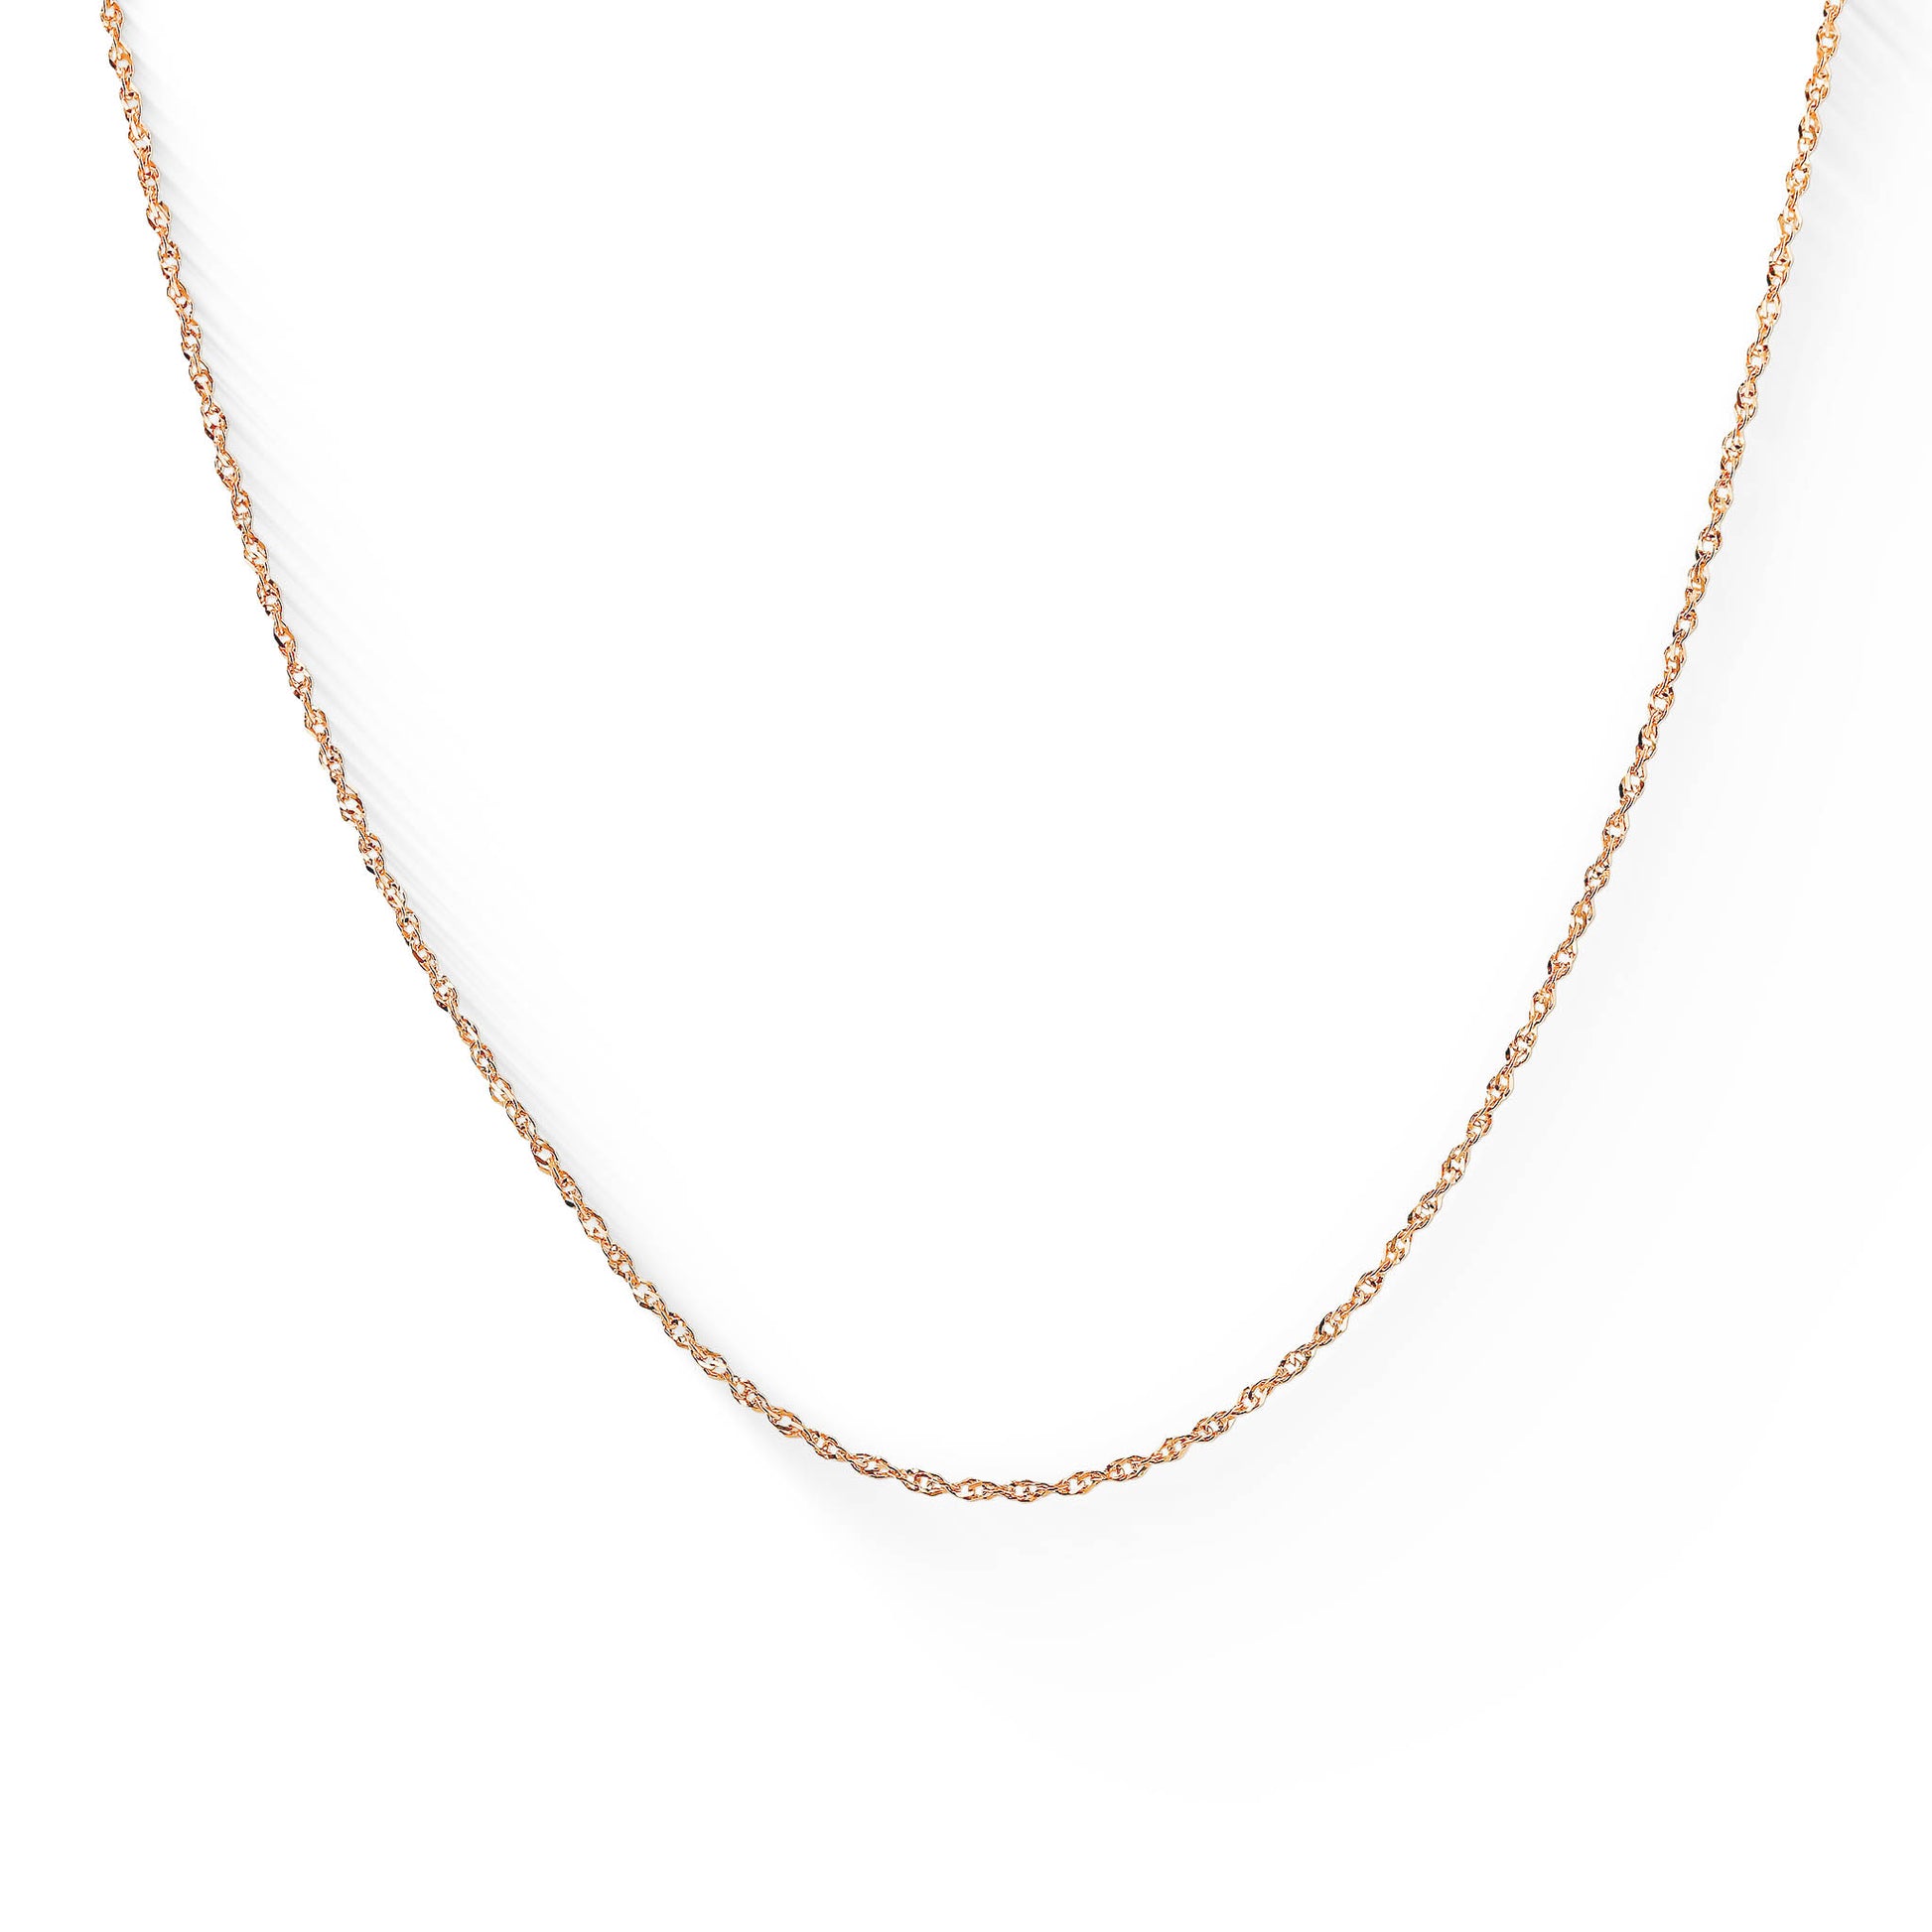 700158 - 14K Rose Gold - 20" Singapore Chain, 1.1mm